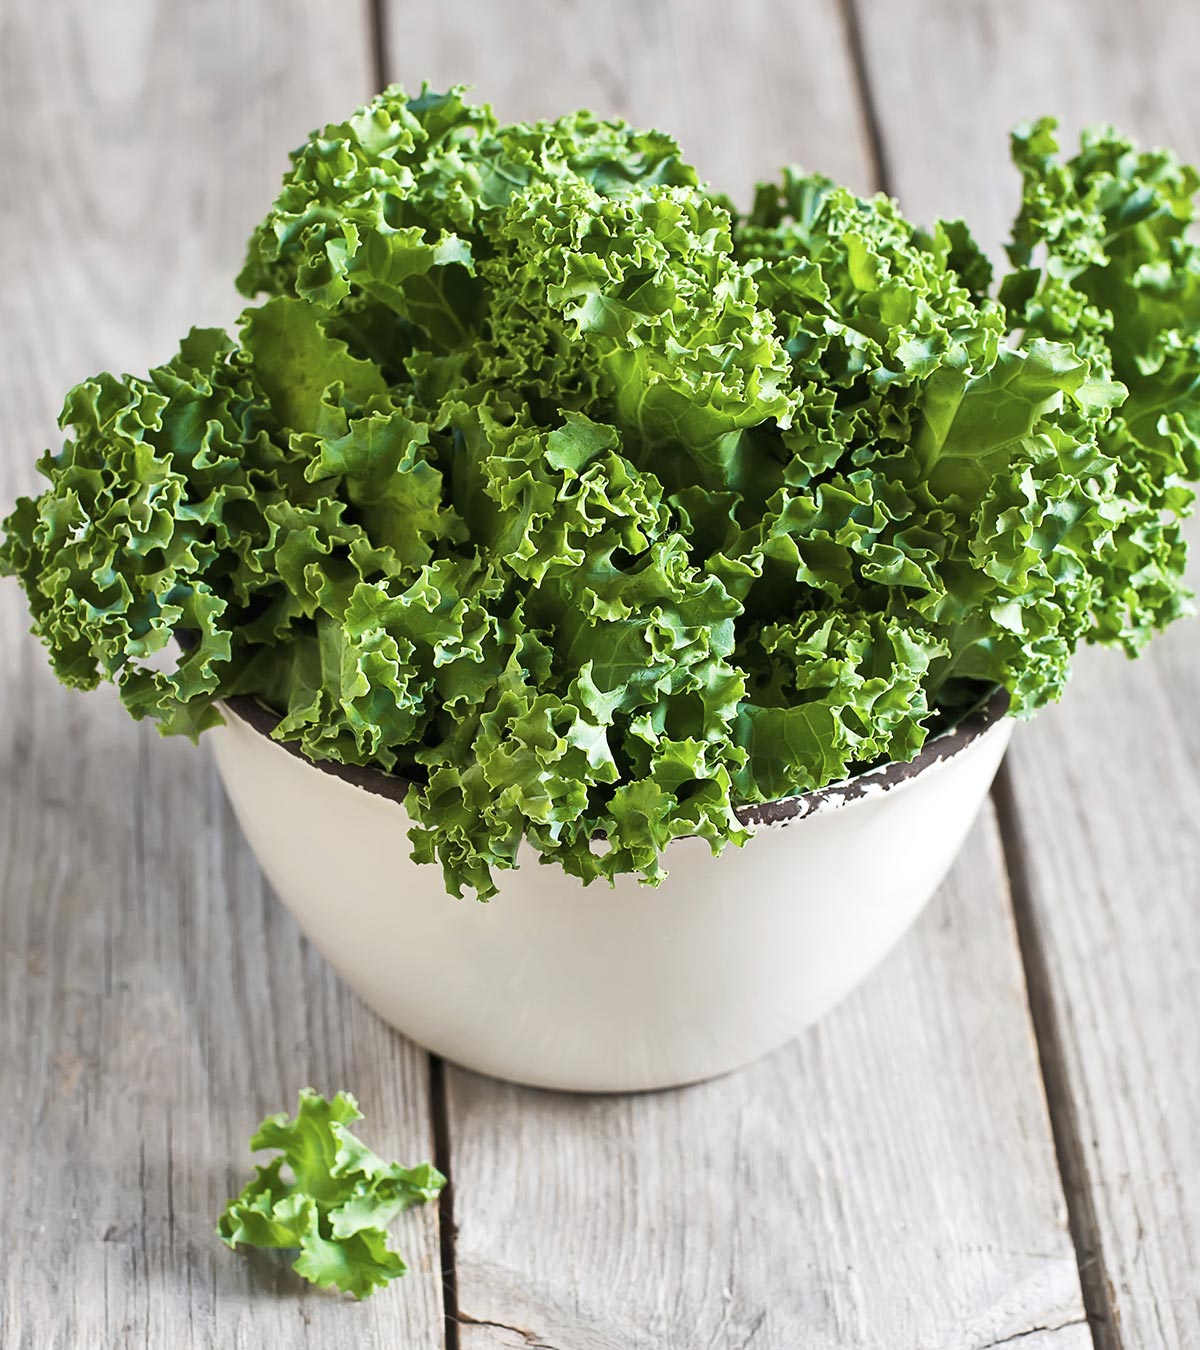 5 Nutritional Benefits Of Kale During Pregnancy